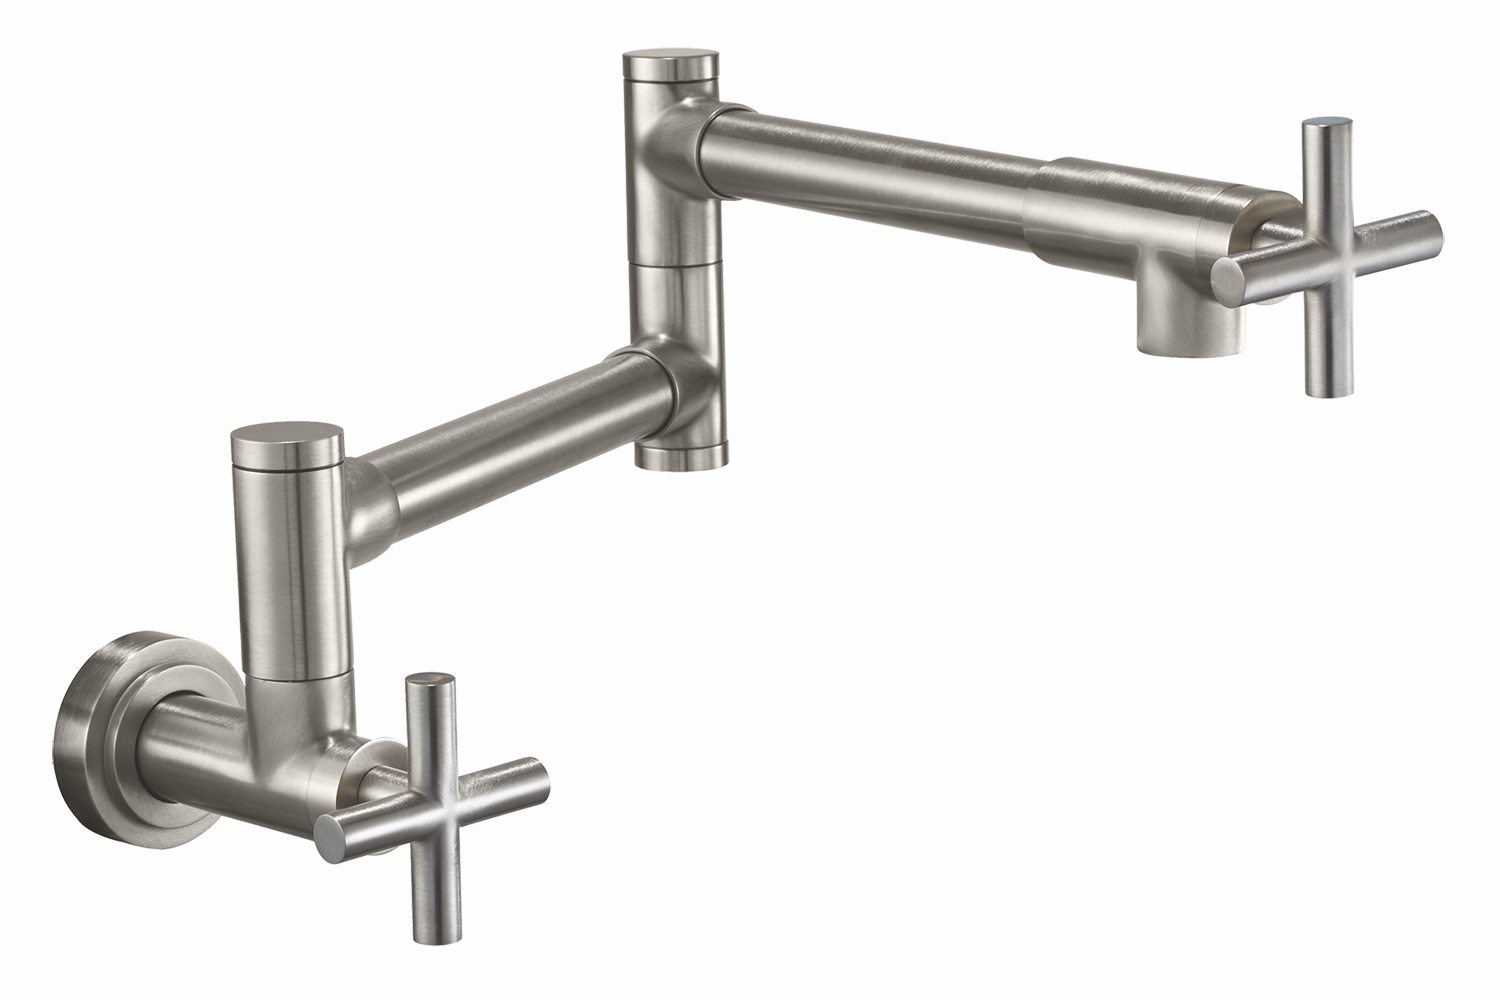 n an expansion of its Kitchen Collection, California Faucets’ new line of ergonomic pot fillers is inspired by Italian design and includes 37 customizable handle selections.